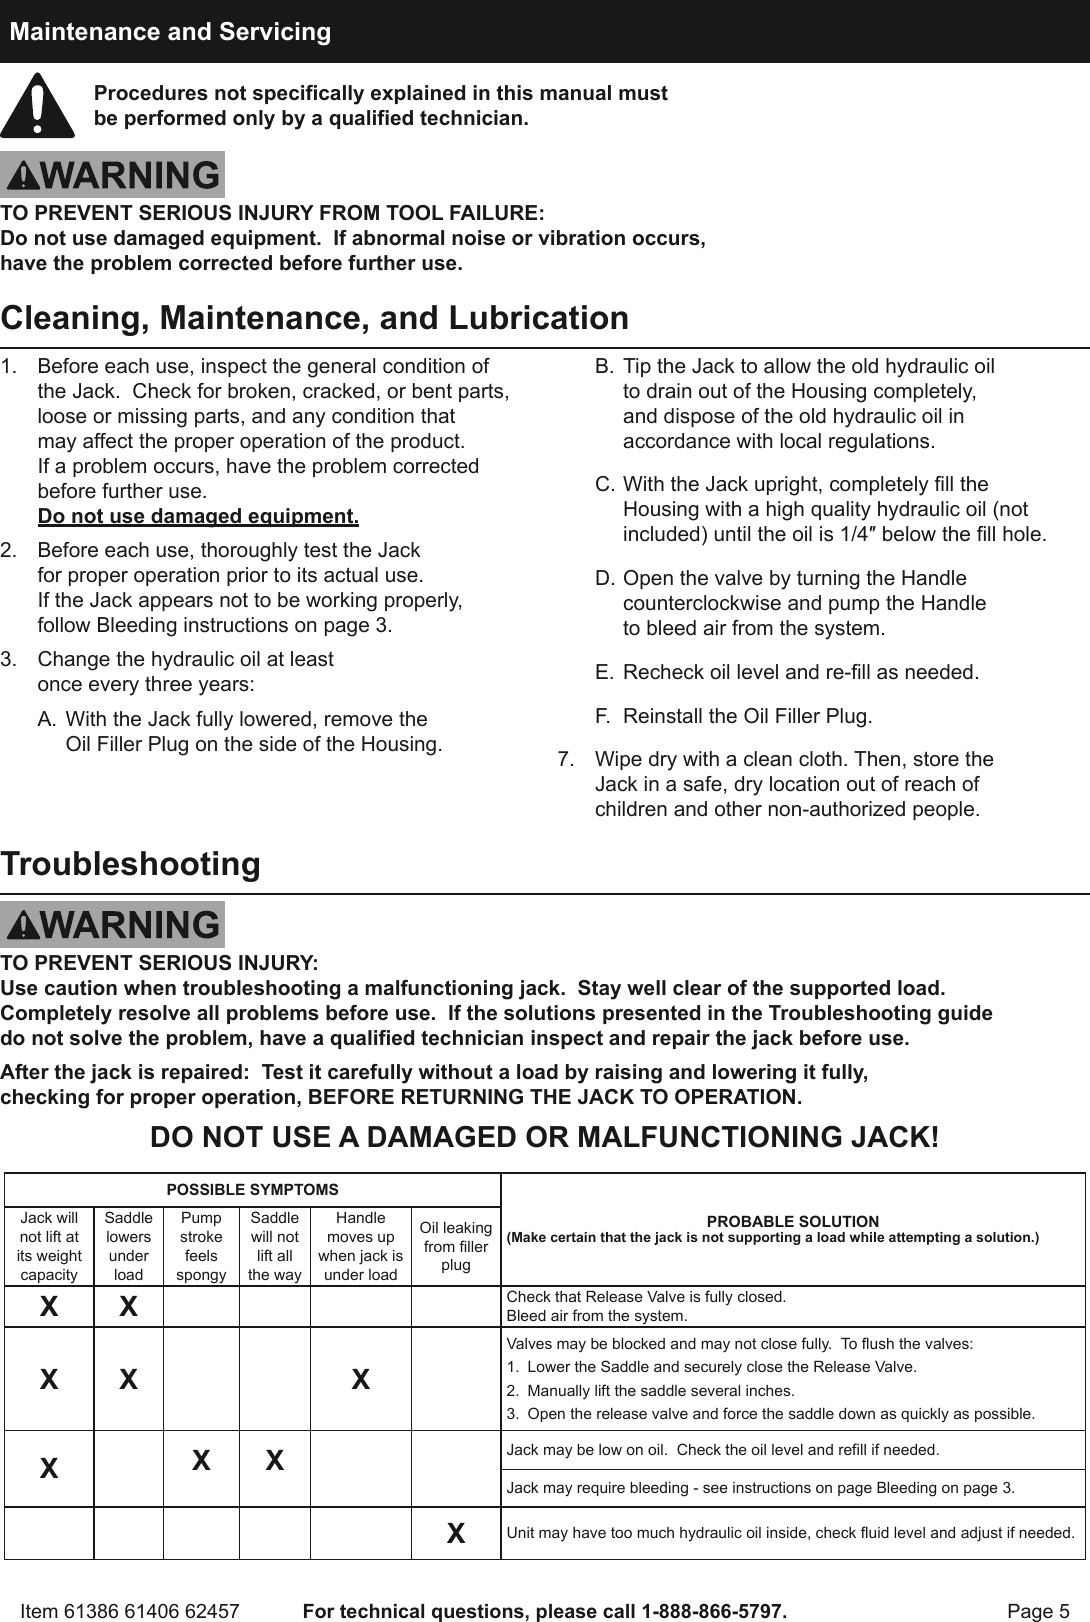 Page 5 of 8 - Harbor-Freight Harbor-Freight-2-Ton-Aluminum-Racing-Floor-Jack-With-Rapidpump-Product-Manual-  Harbor-freight-2-ton-aluminum-racing-floor-jack-with-rapidpump-product-manual